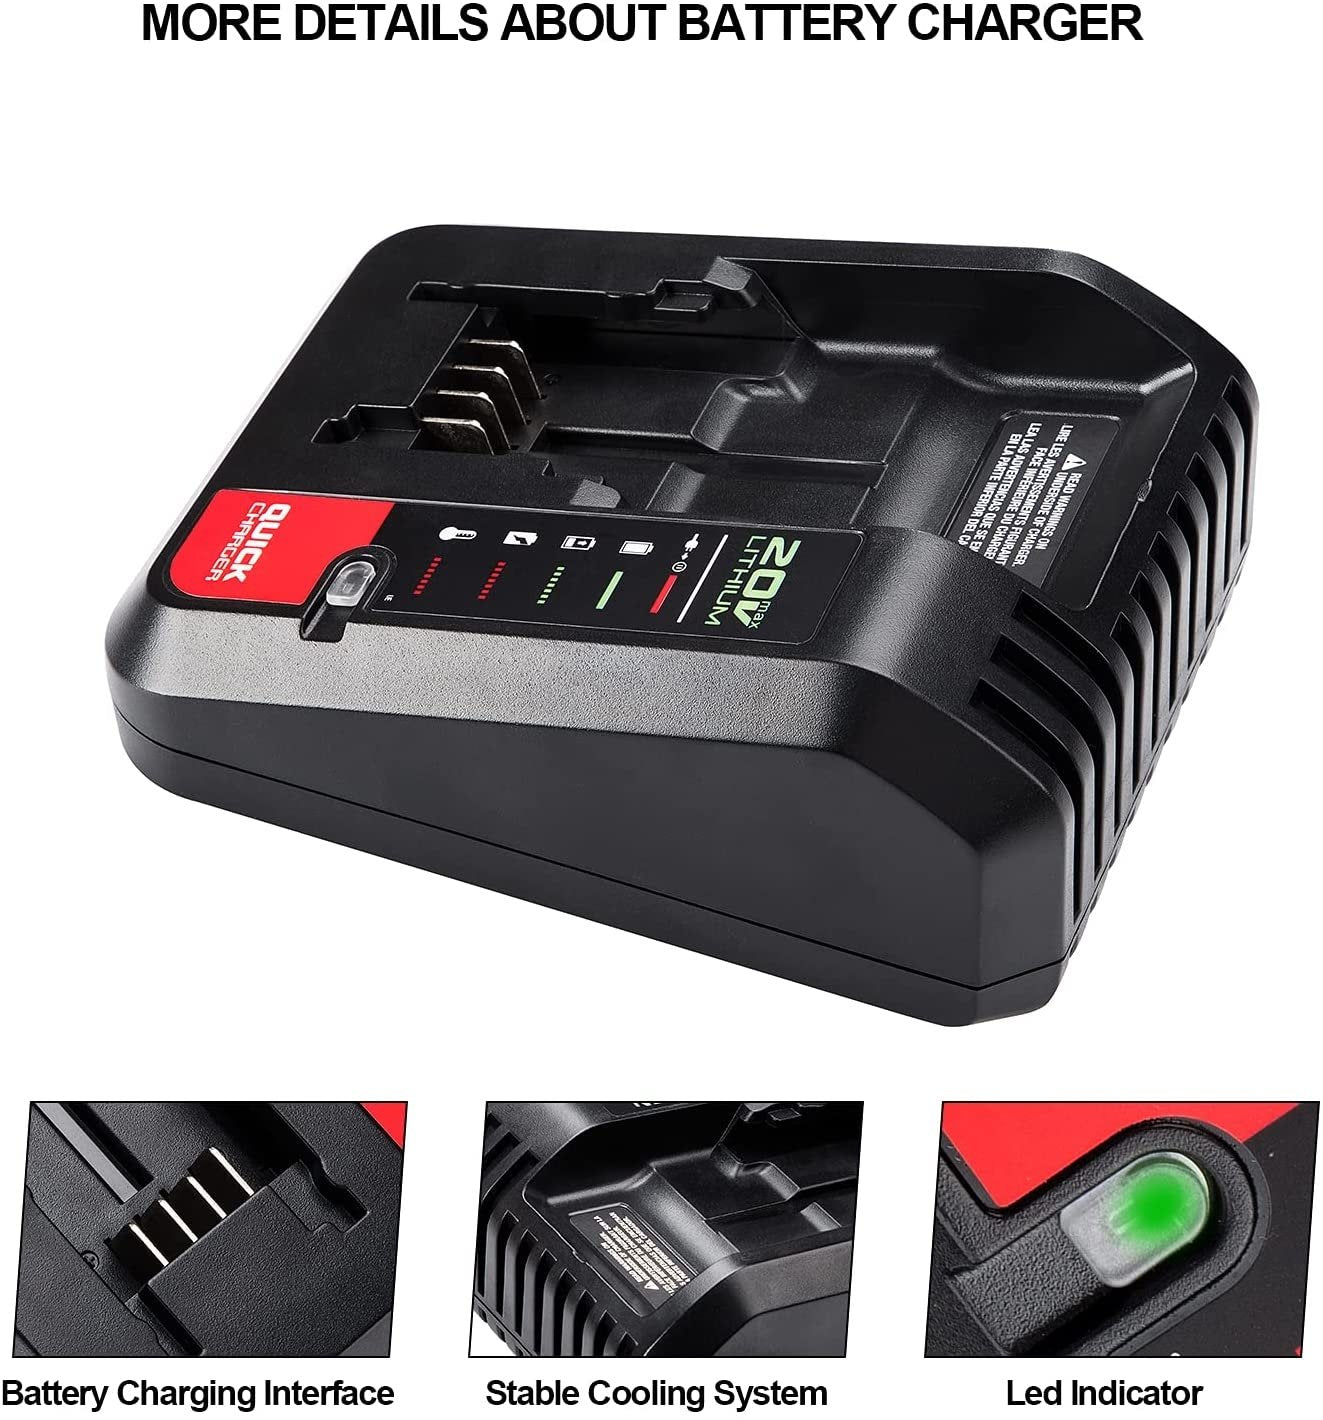 BLACK+DECKER 20V MAX Lithium Battery Charger with 4-Ah Lithium Ion Battery  Pack (BDCAC202B & LB2X4020)